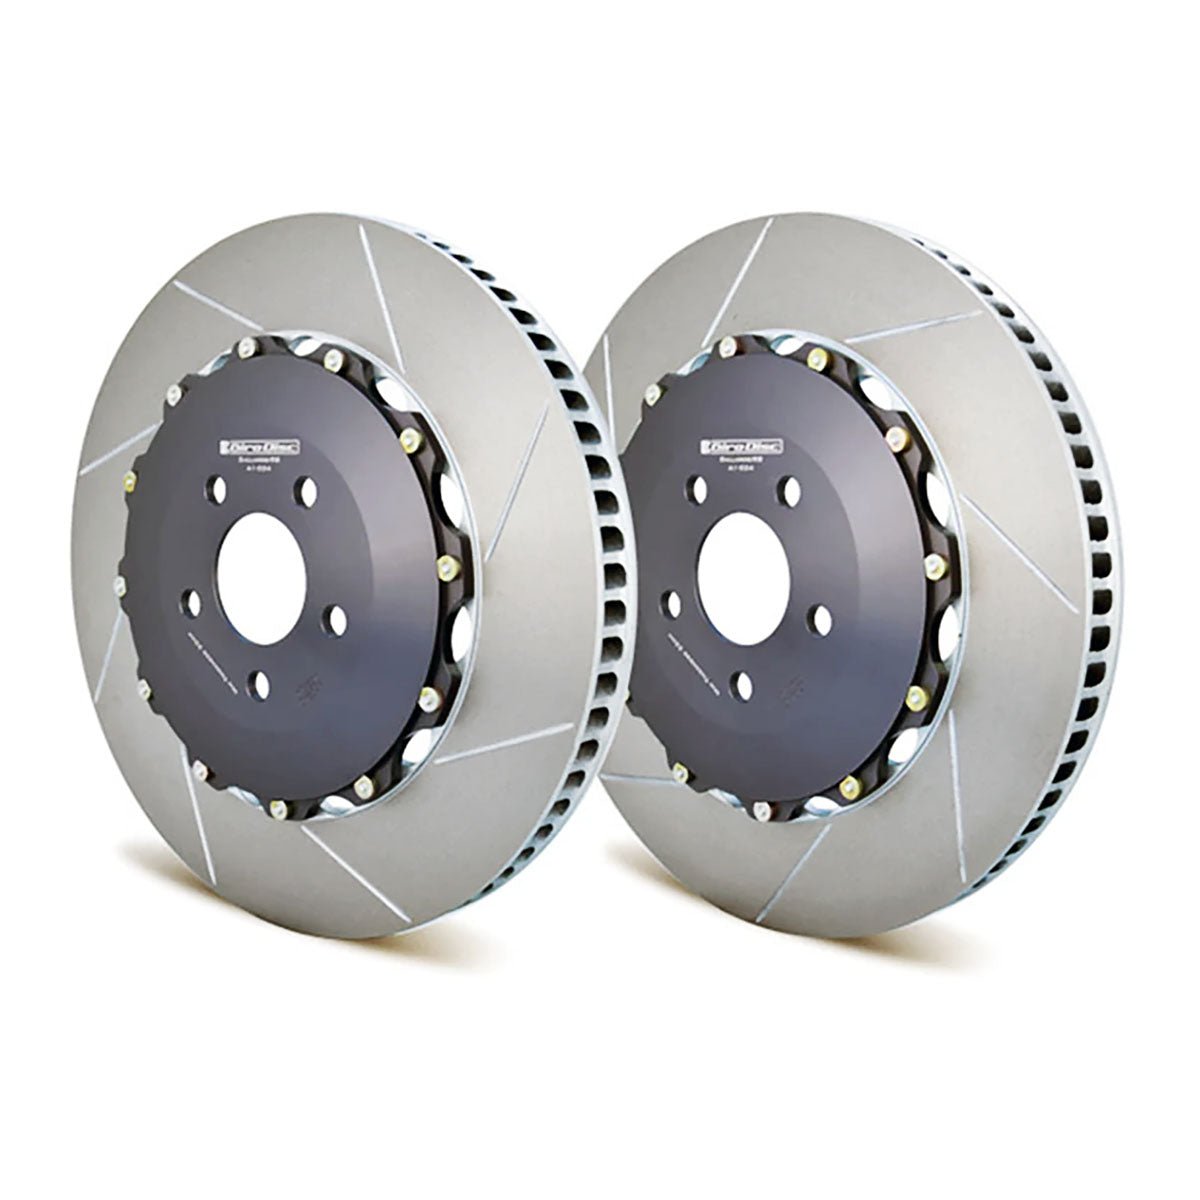 A1-050 Girodisc 2pc Front Brake Rotors - Competition Motorsport